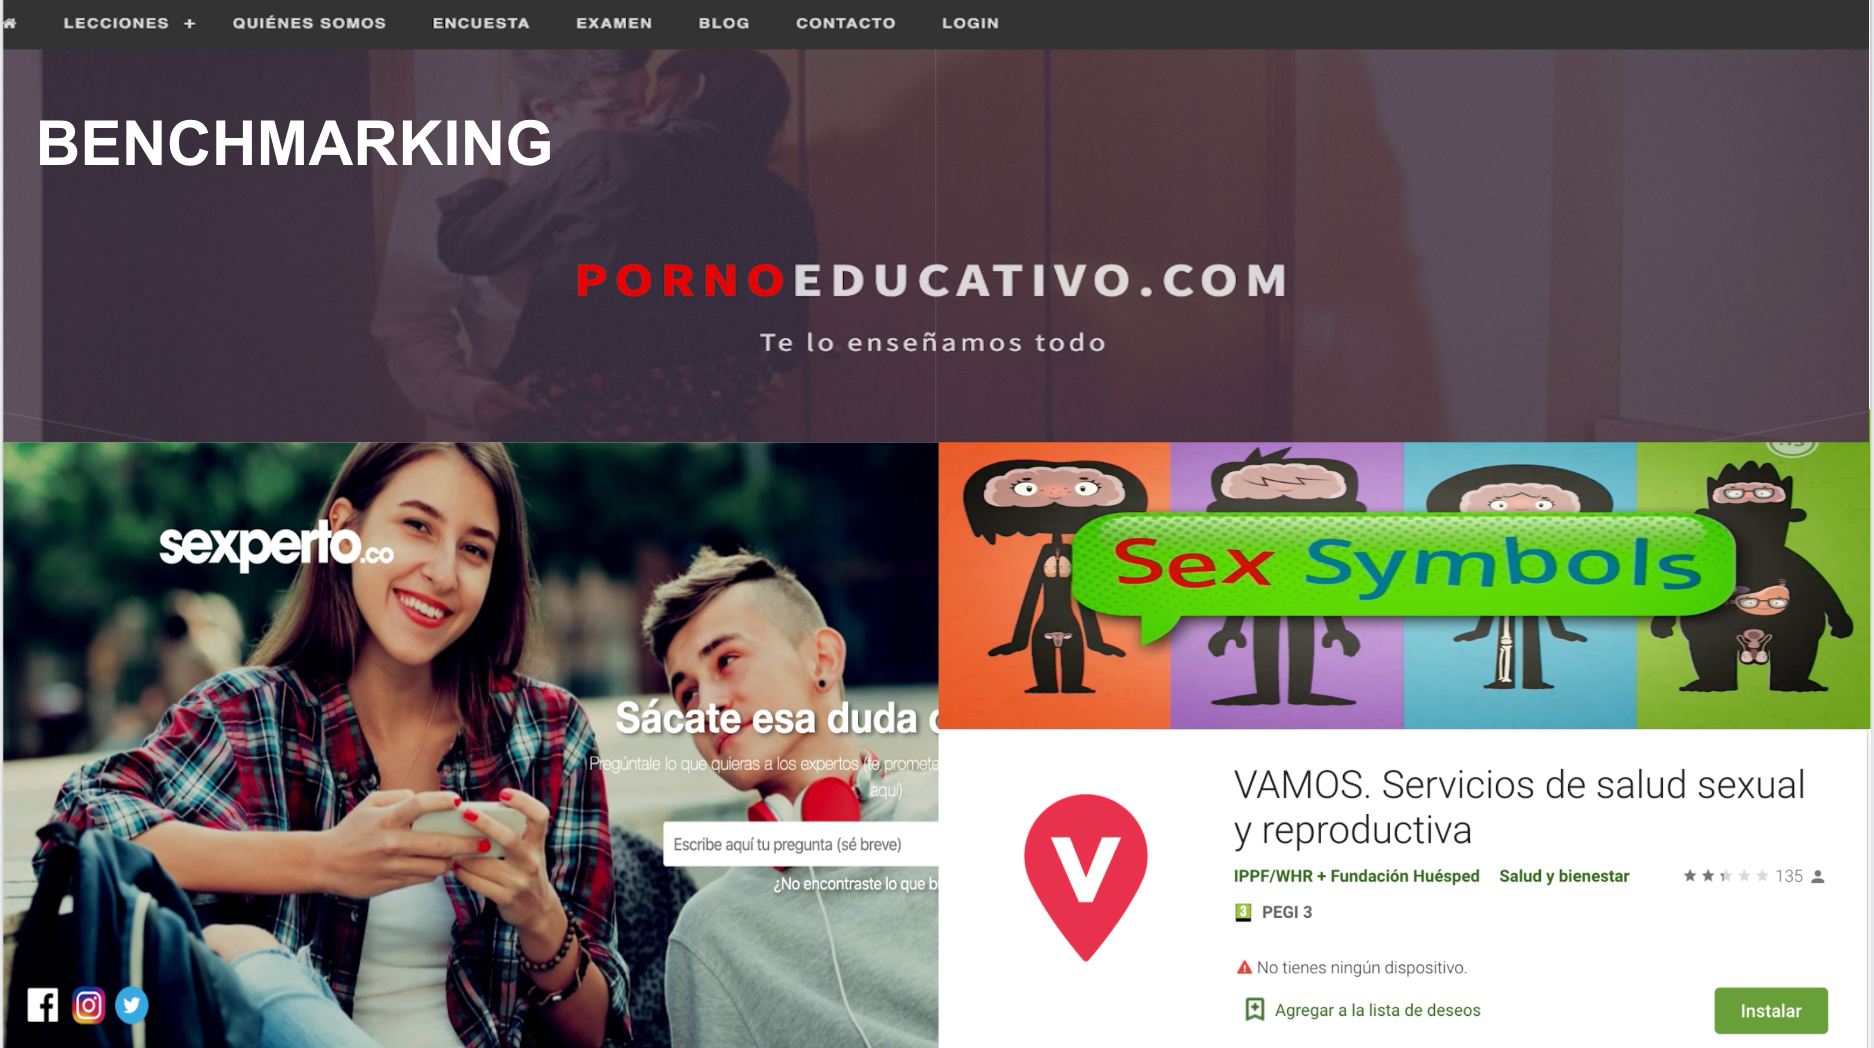 Sexpedia- Or how to improve SpainÂ´s Sex Education -. | by Irene Larrauri |  UX Planet